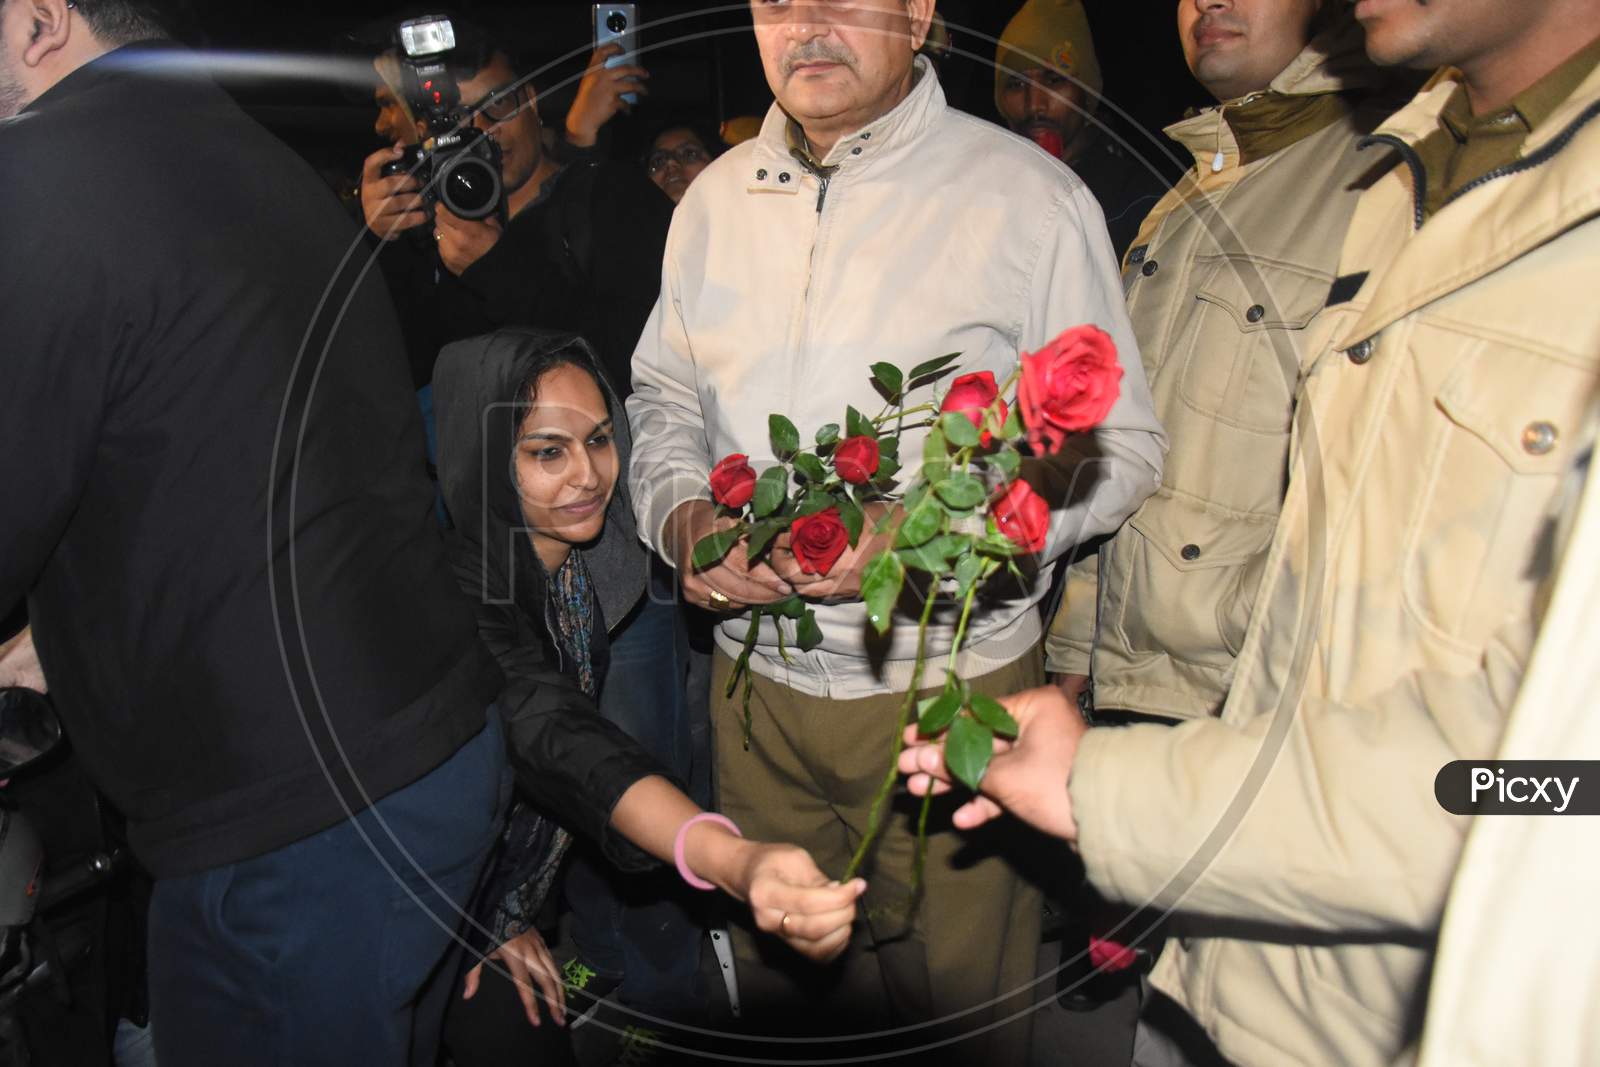 Students Giving Flowers To Delhi Police During Protests Against CAB, NRC, And CAA In Delhi